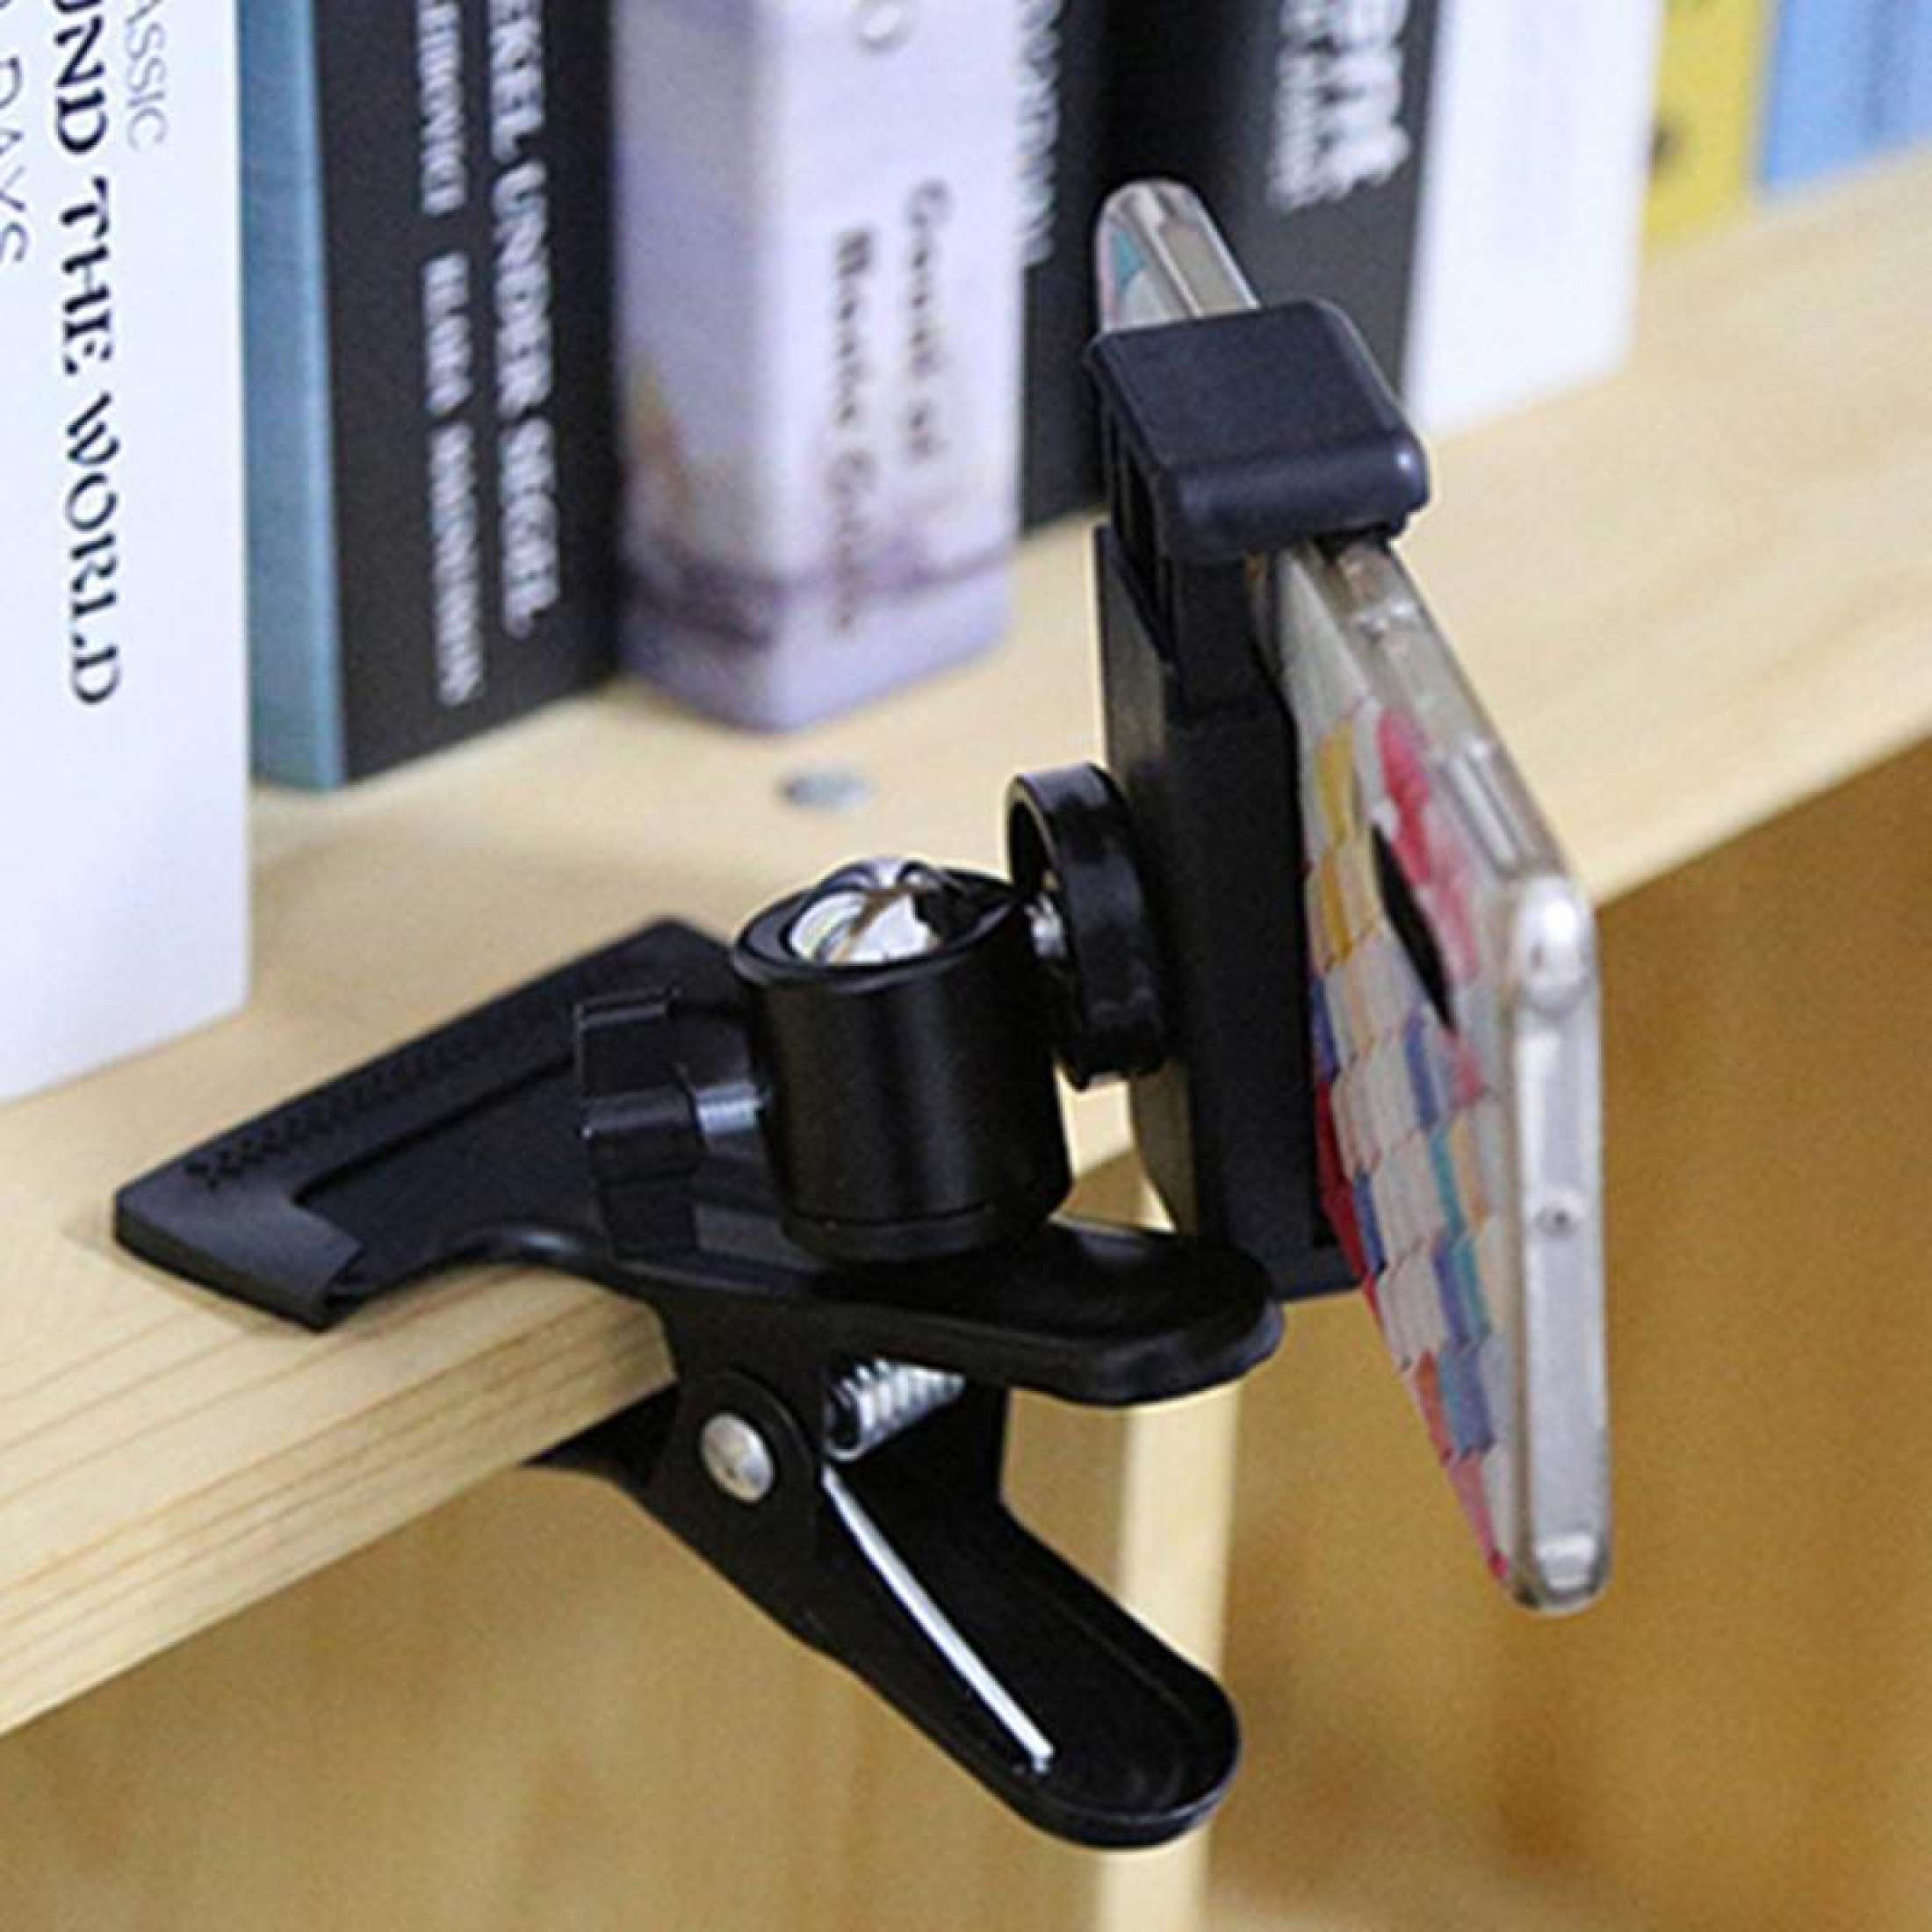 Clip Mount Clamp Holder with Ball Head Universal Screw PK H3000%20(19)